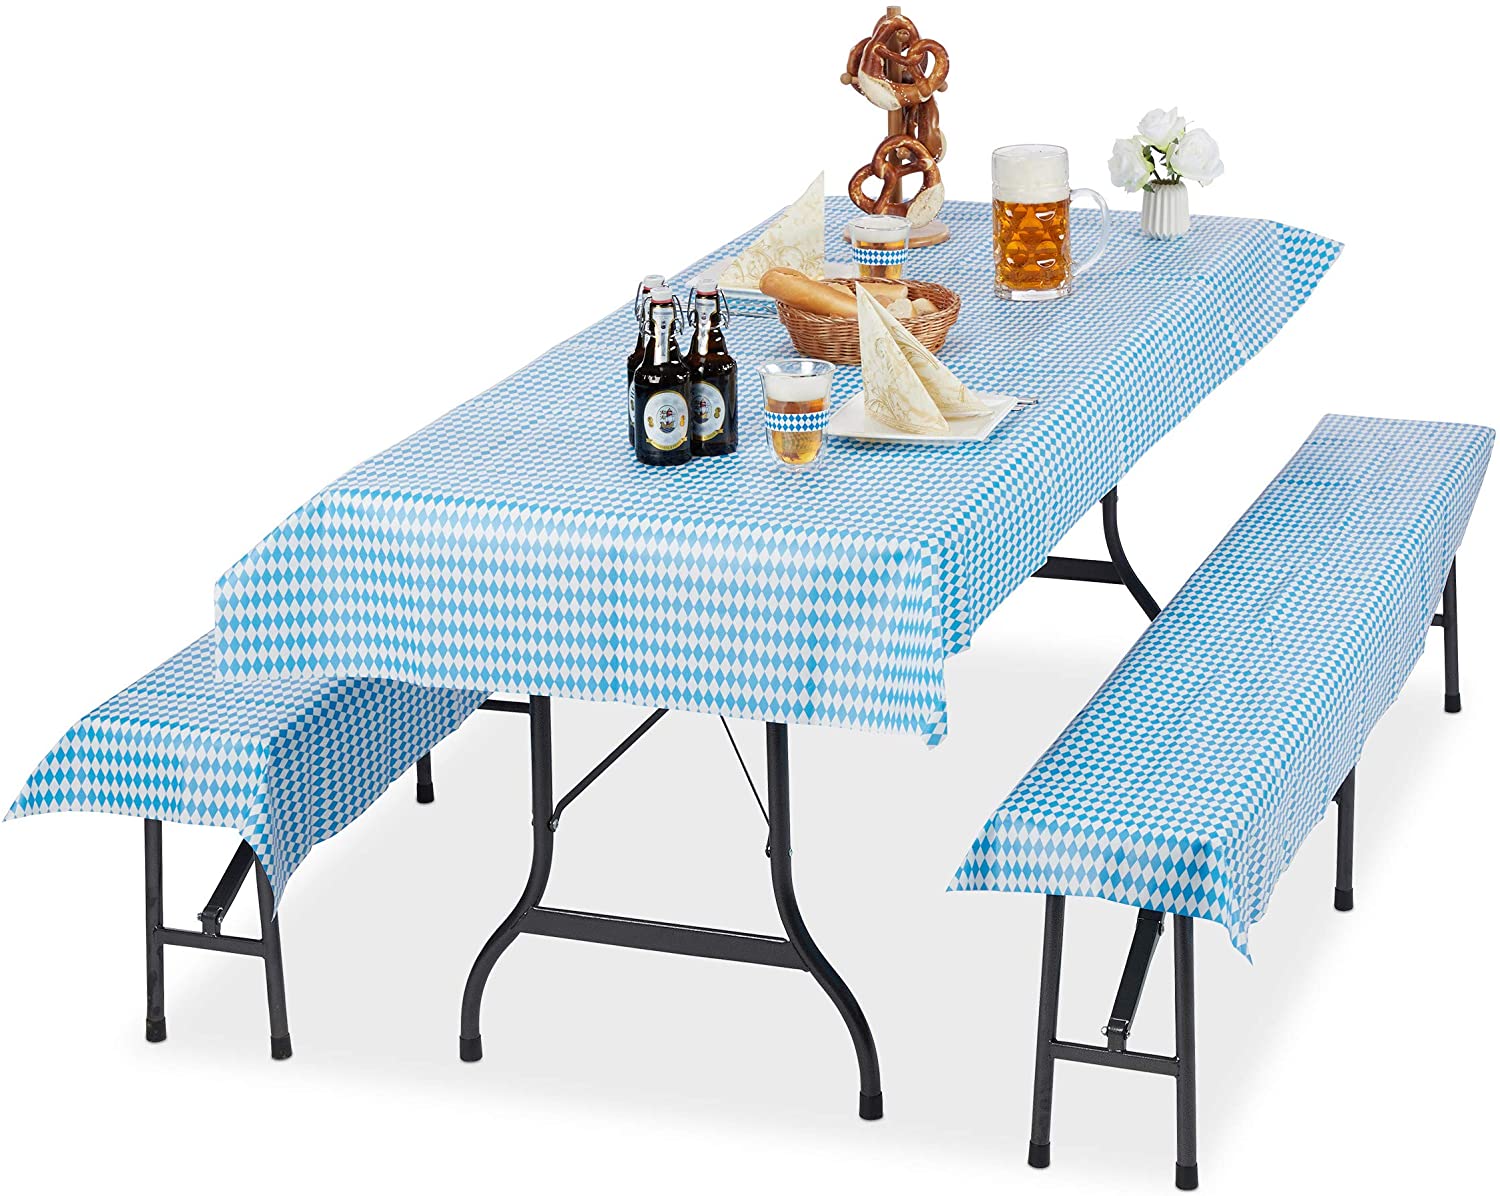 Relaxdays Oktoberfest Beer Tent Set Of 3 Beer Table Tablecloth 250 X 100 Cm